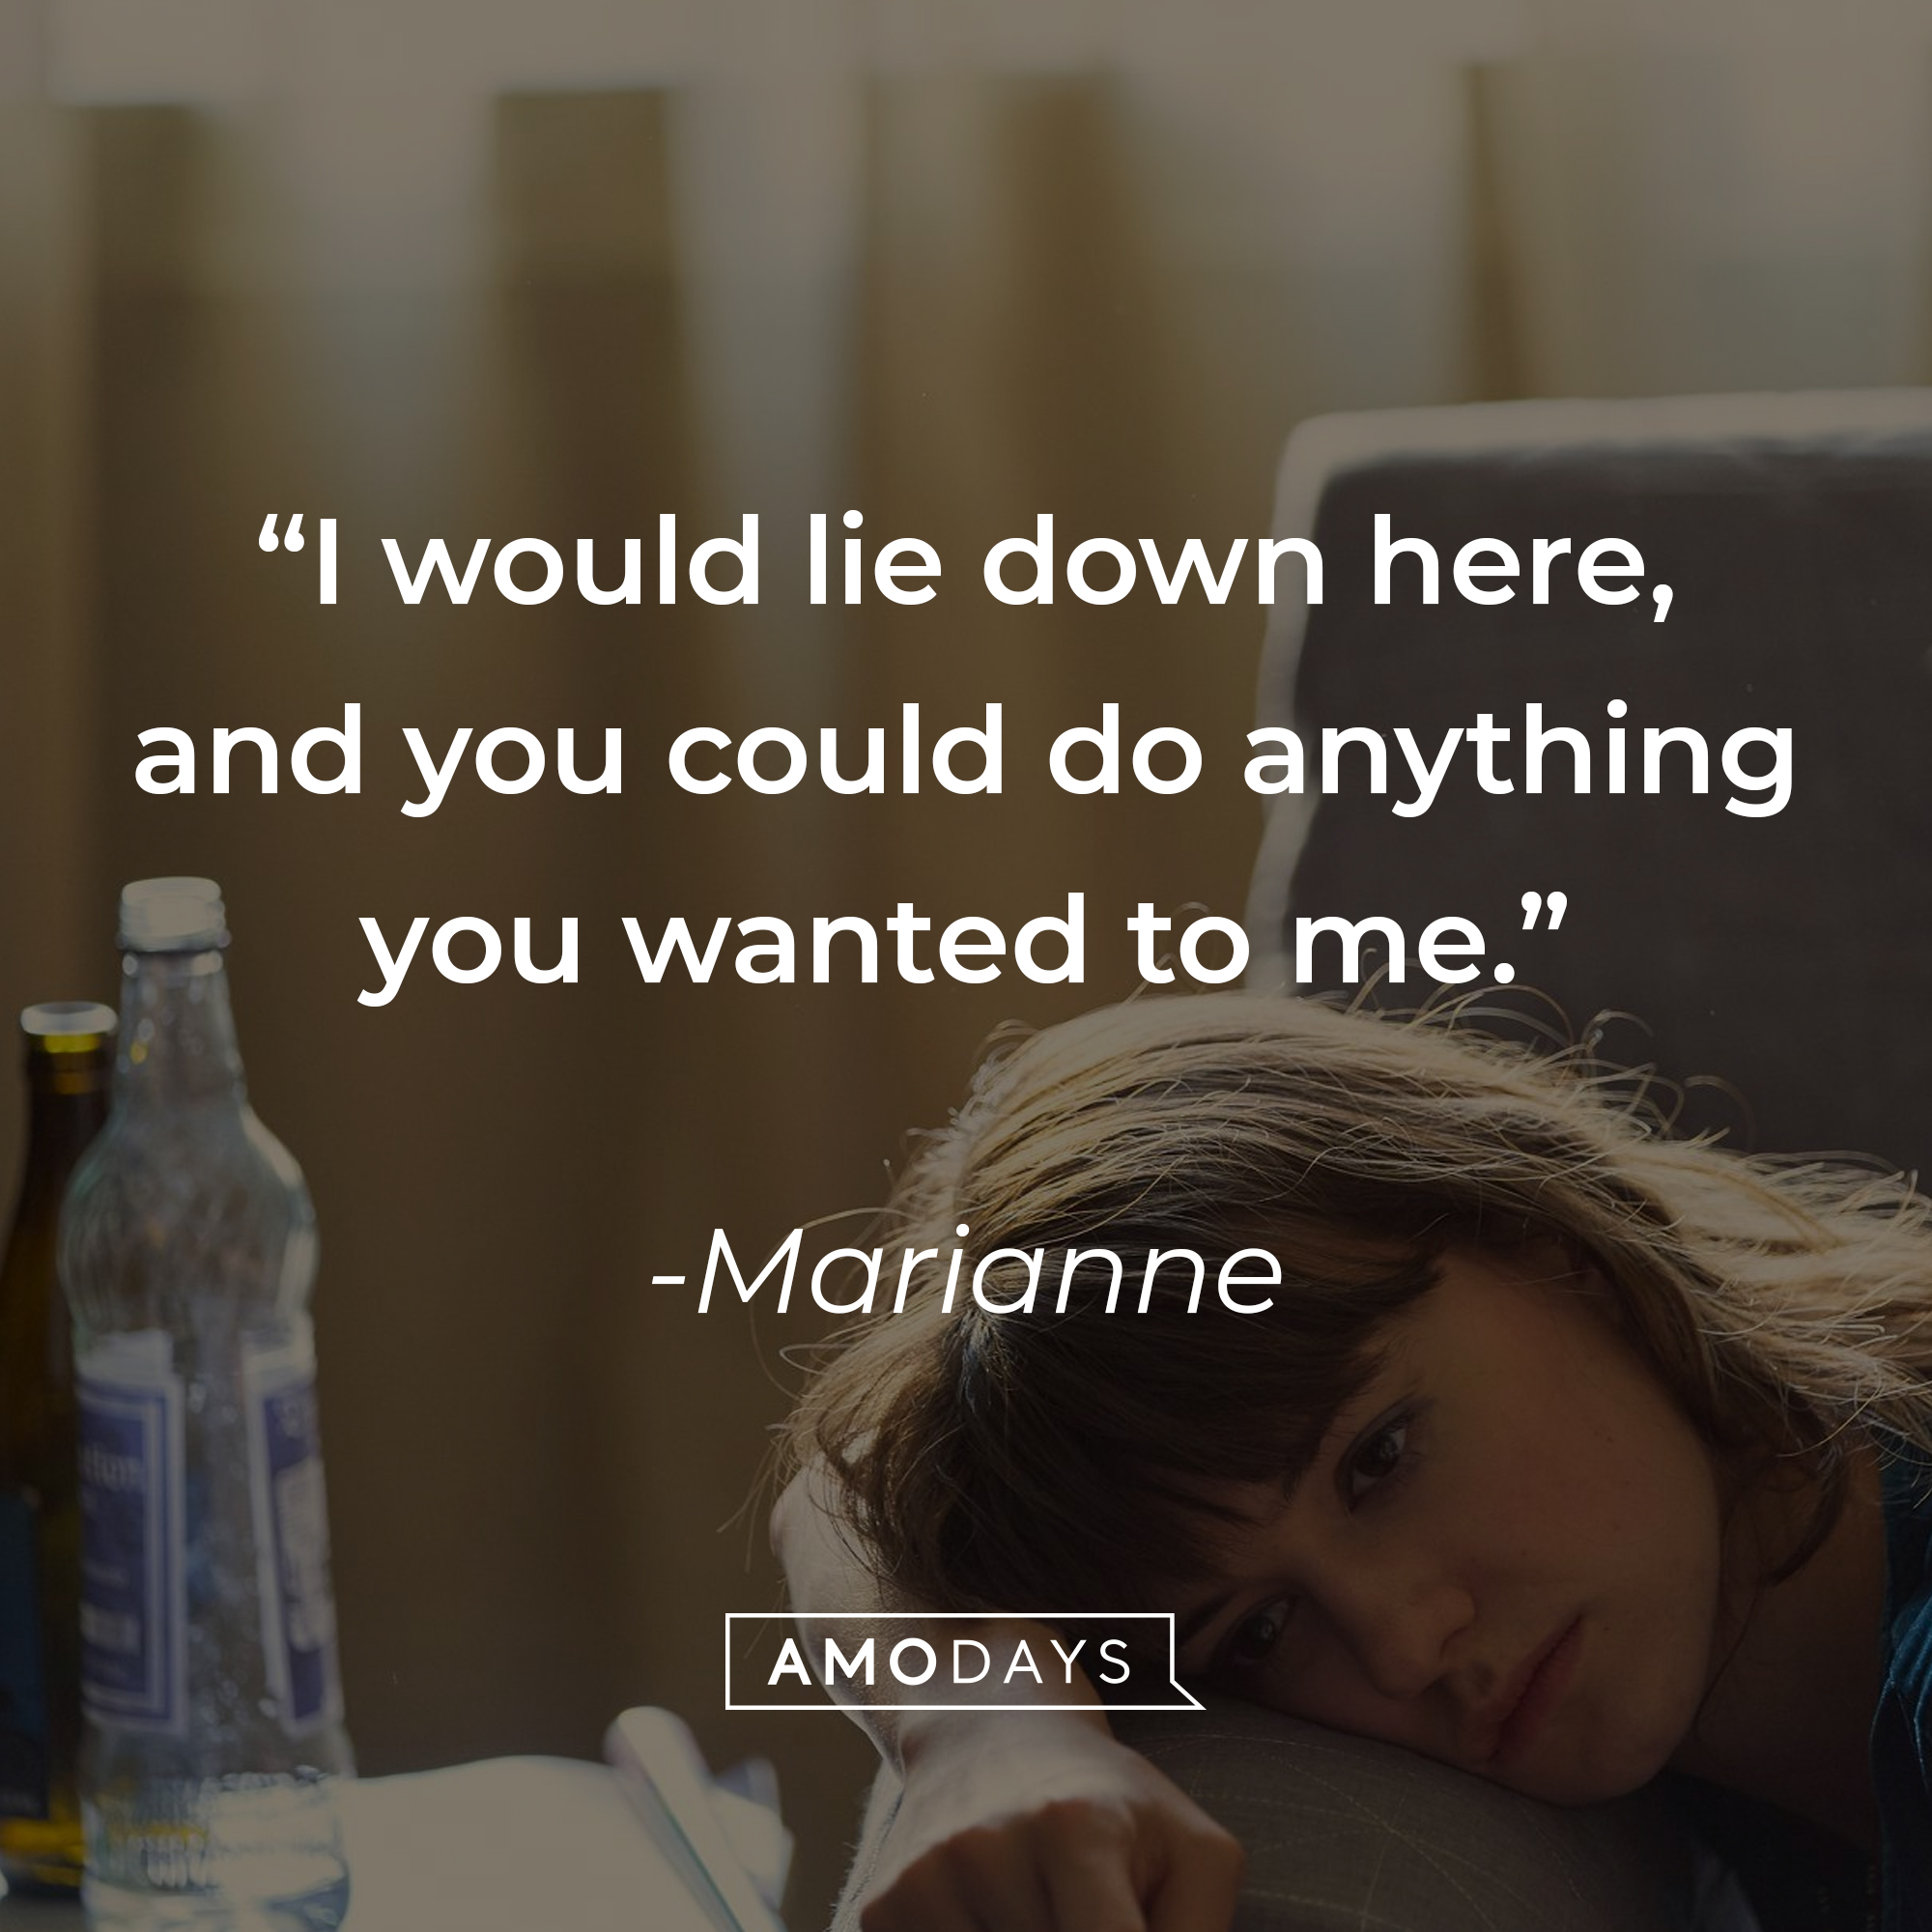 Marianne, with her quote: "I would lie down here, and you could do anything you wanted to me." | Source: facebook.com/normalpeoplebbc